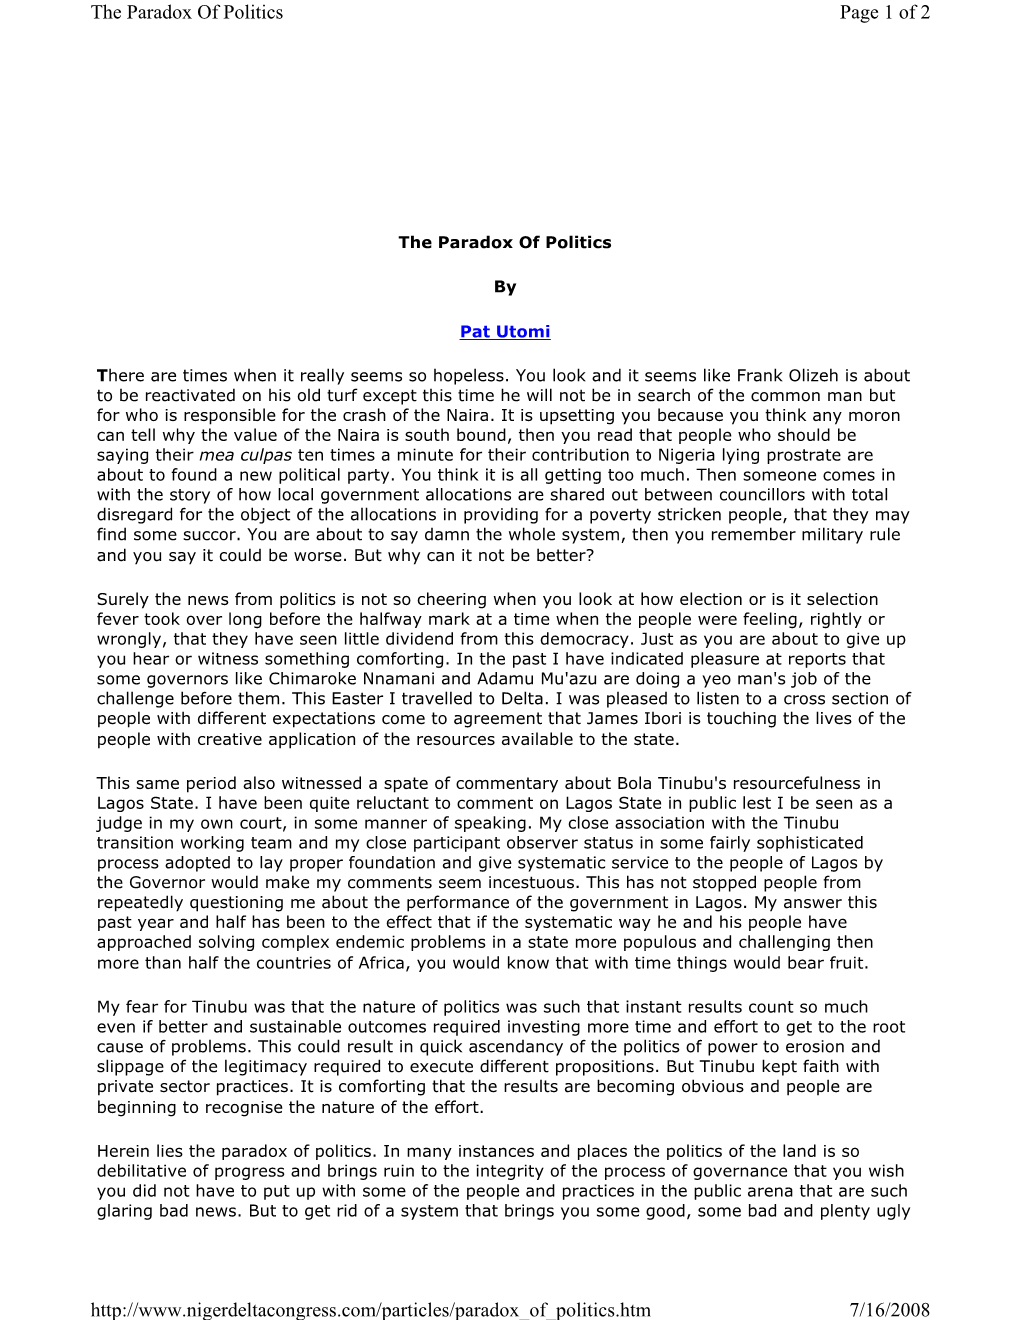 The Paradox of Politics Page 1 of 2